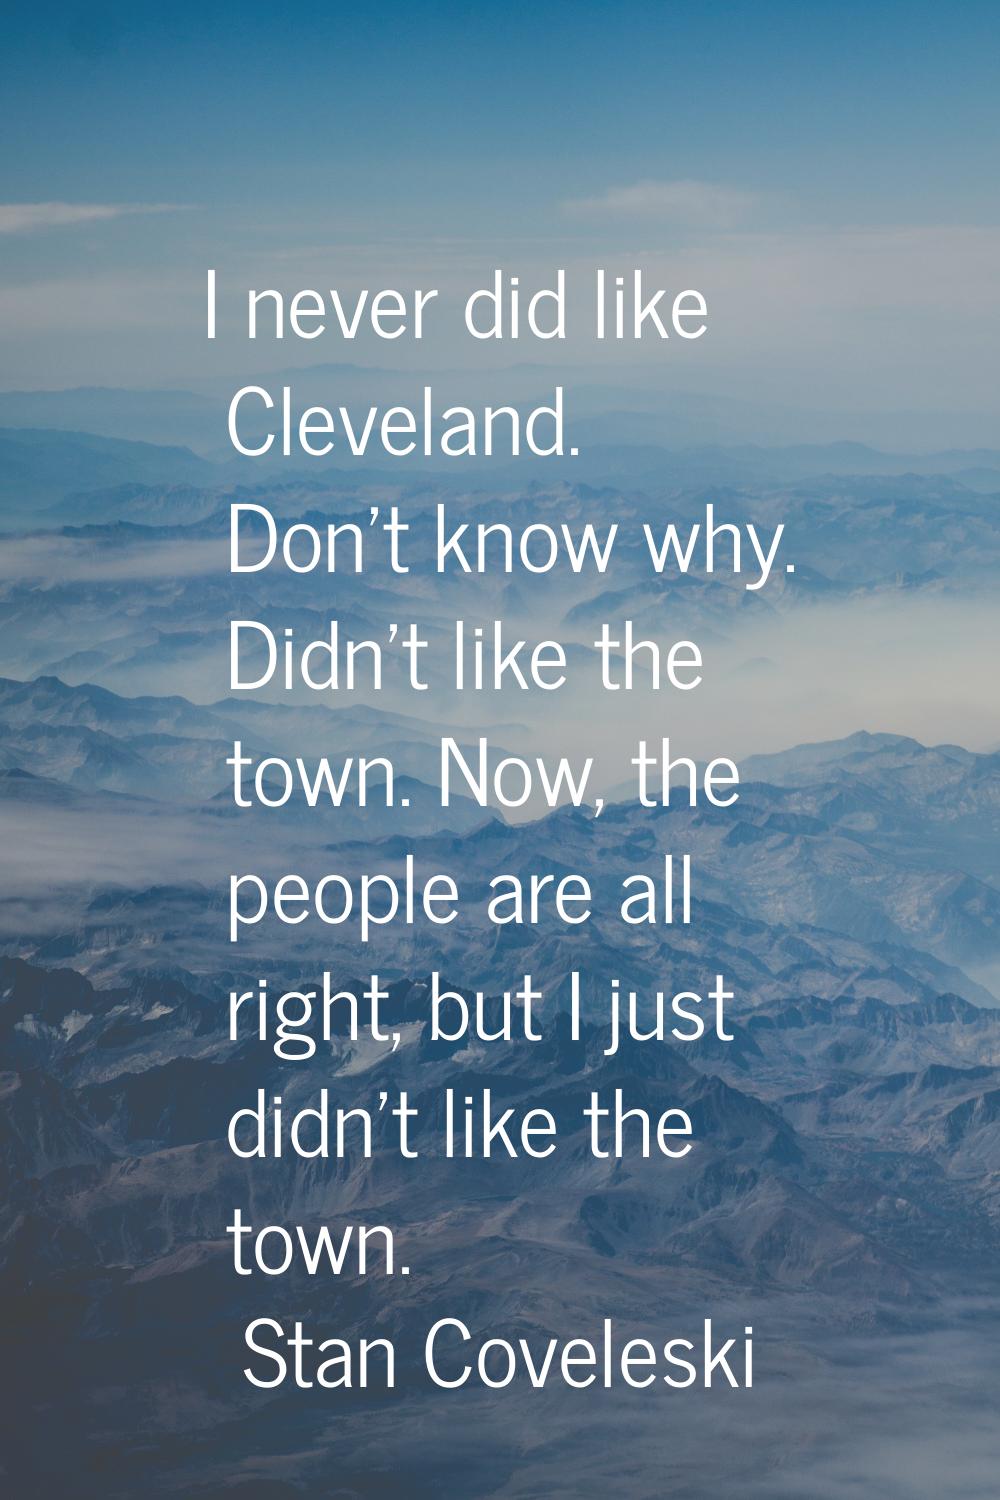 I never did like Cleveland. Don't know why. Didn't like the town. Now, the people are all right, bu